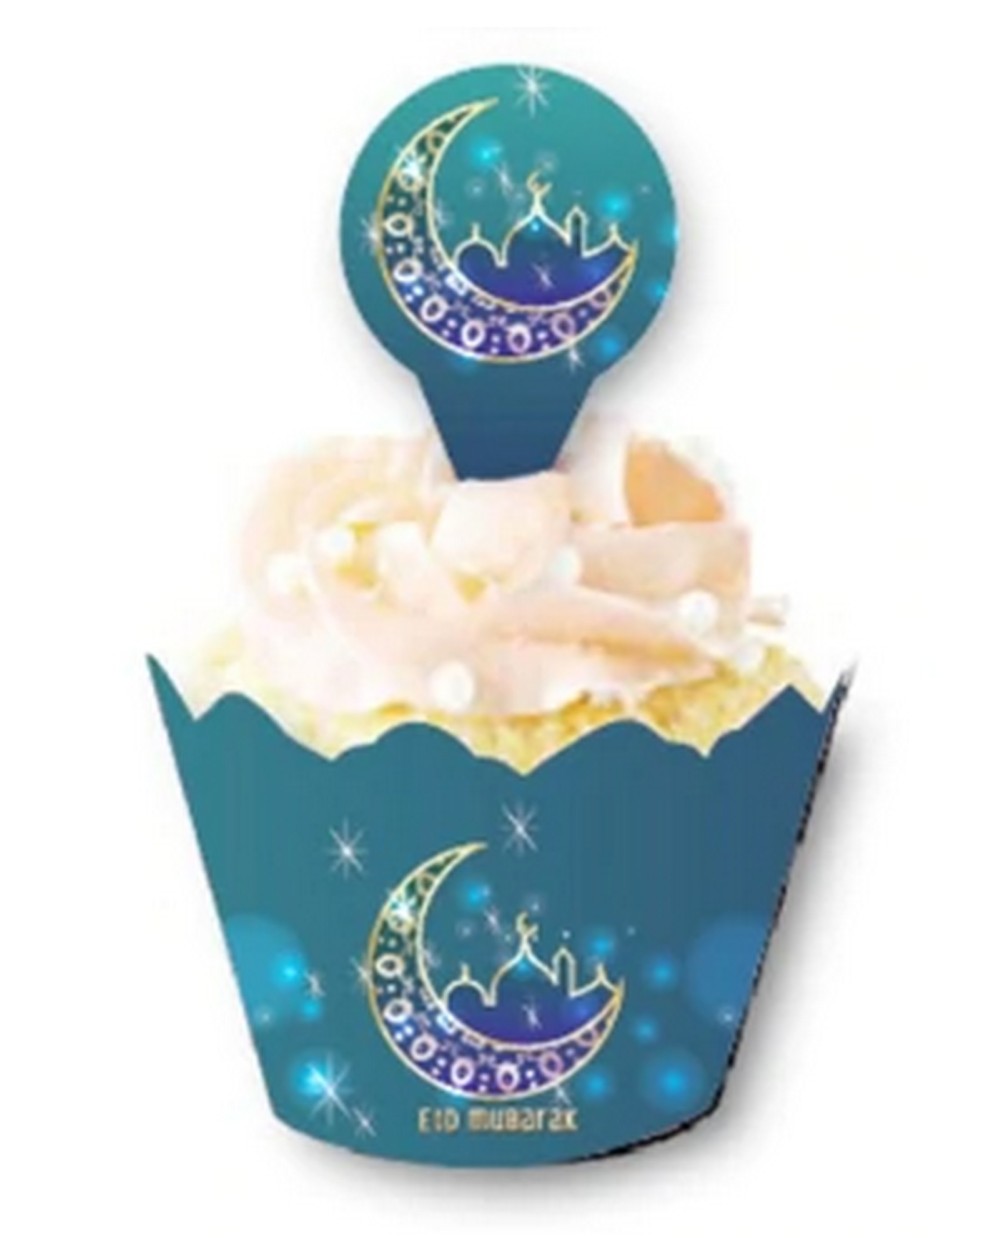 Set of 12 cupcake surrounds with moon spades and Eid mubarak mosque